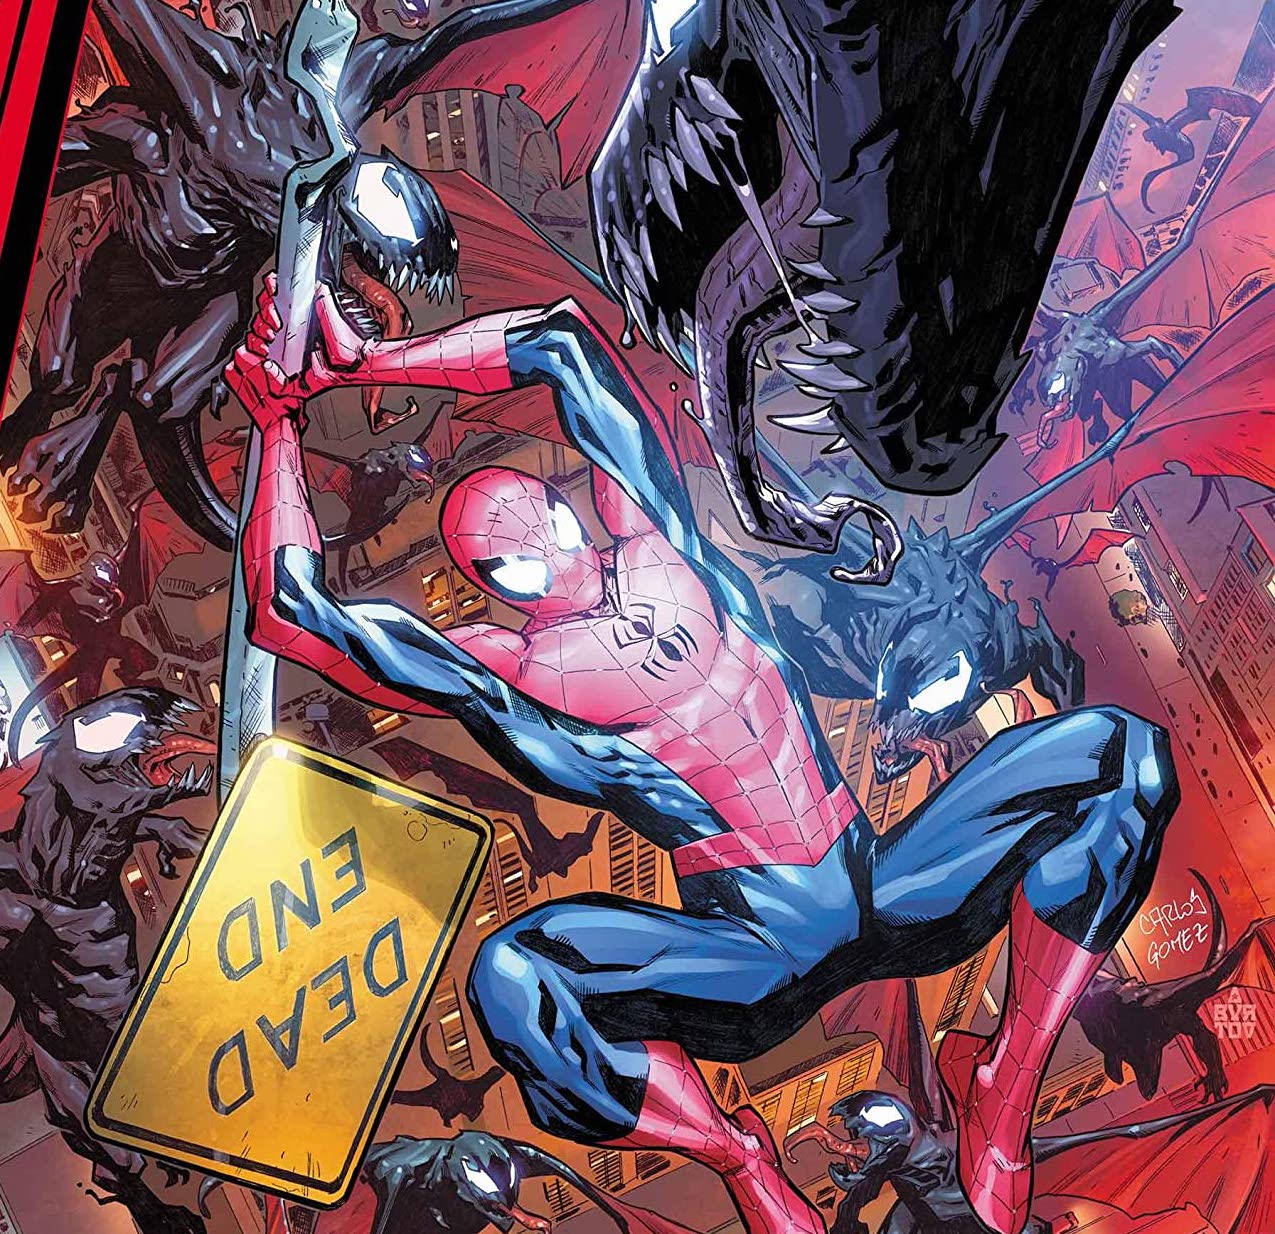 'King in Black: Spider-Man' #1 nails every facet of Spider-Man